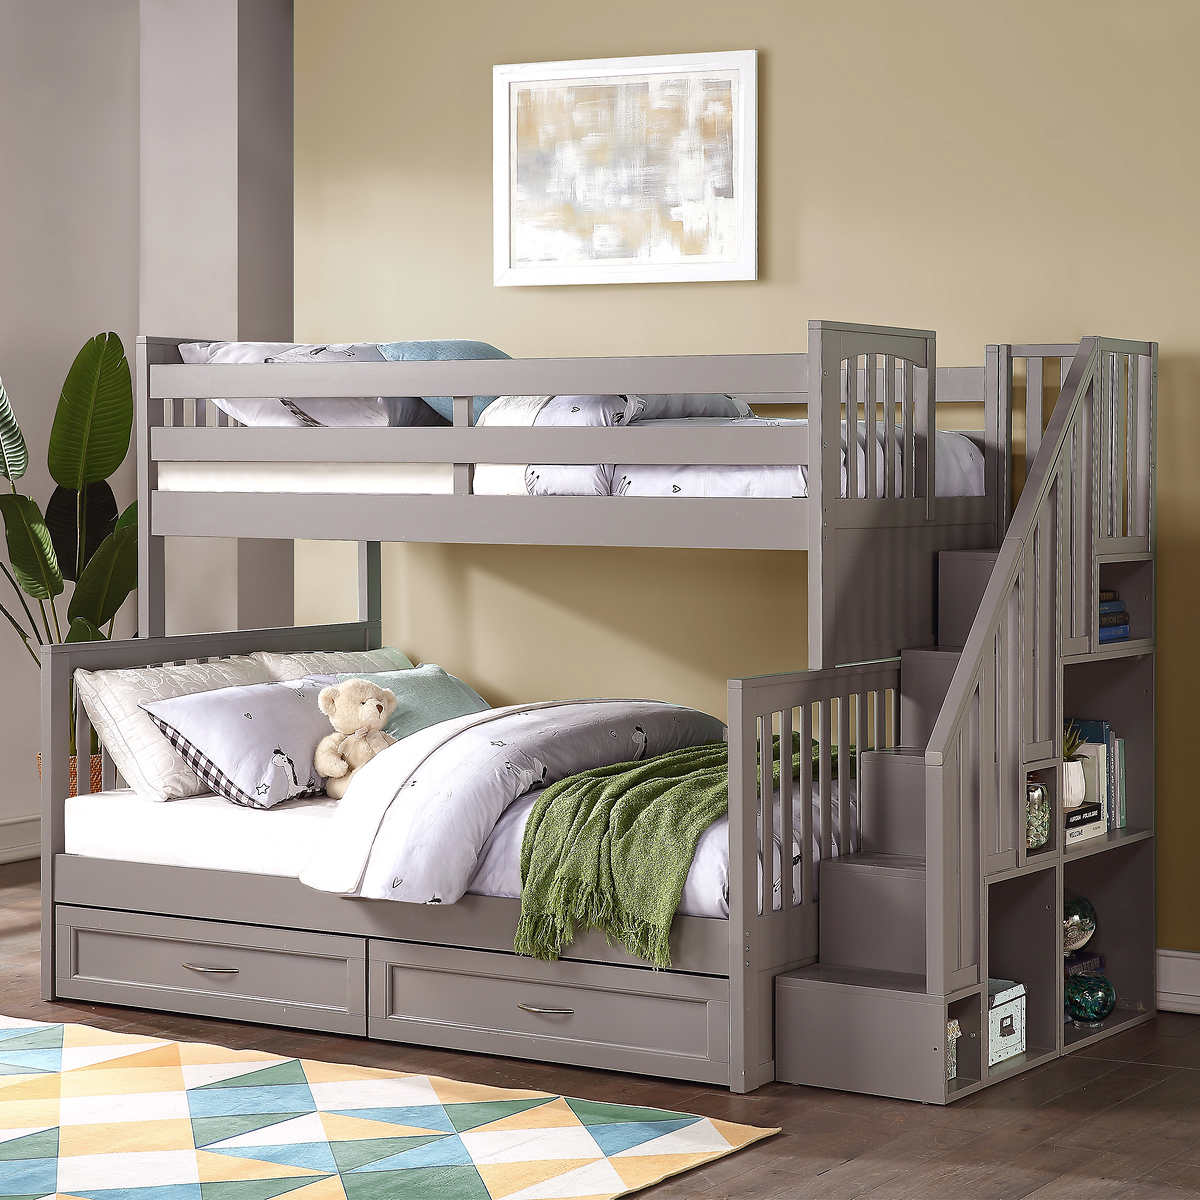 Vandalay Twin Over Double Bunk Bed With, Twin Beds That Convert To Bunk